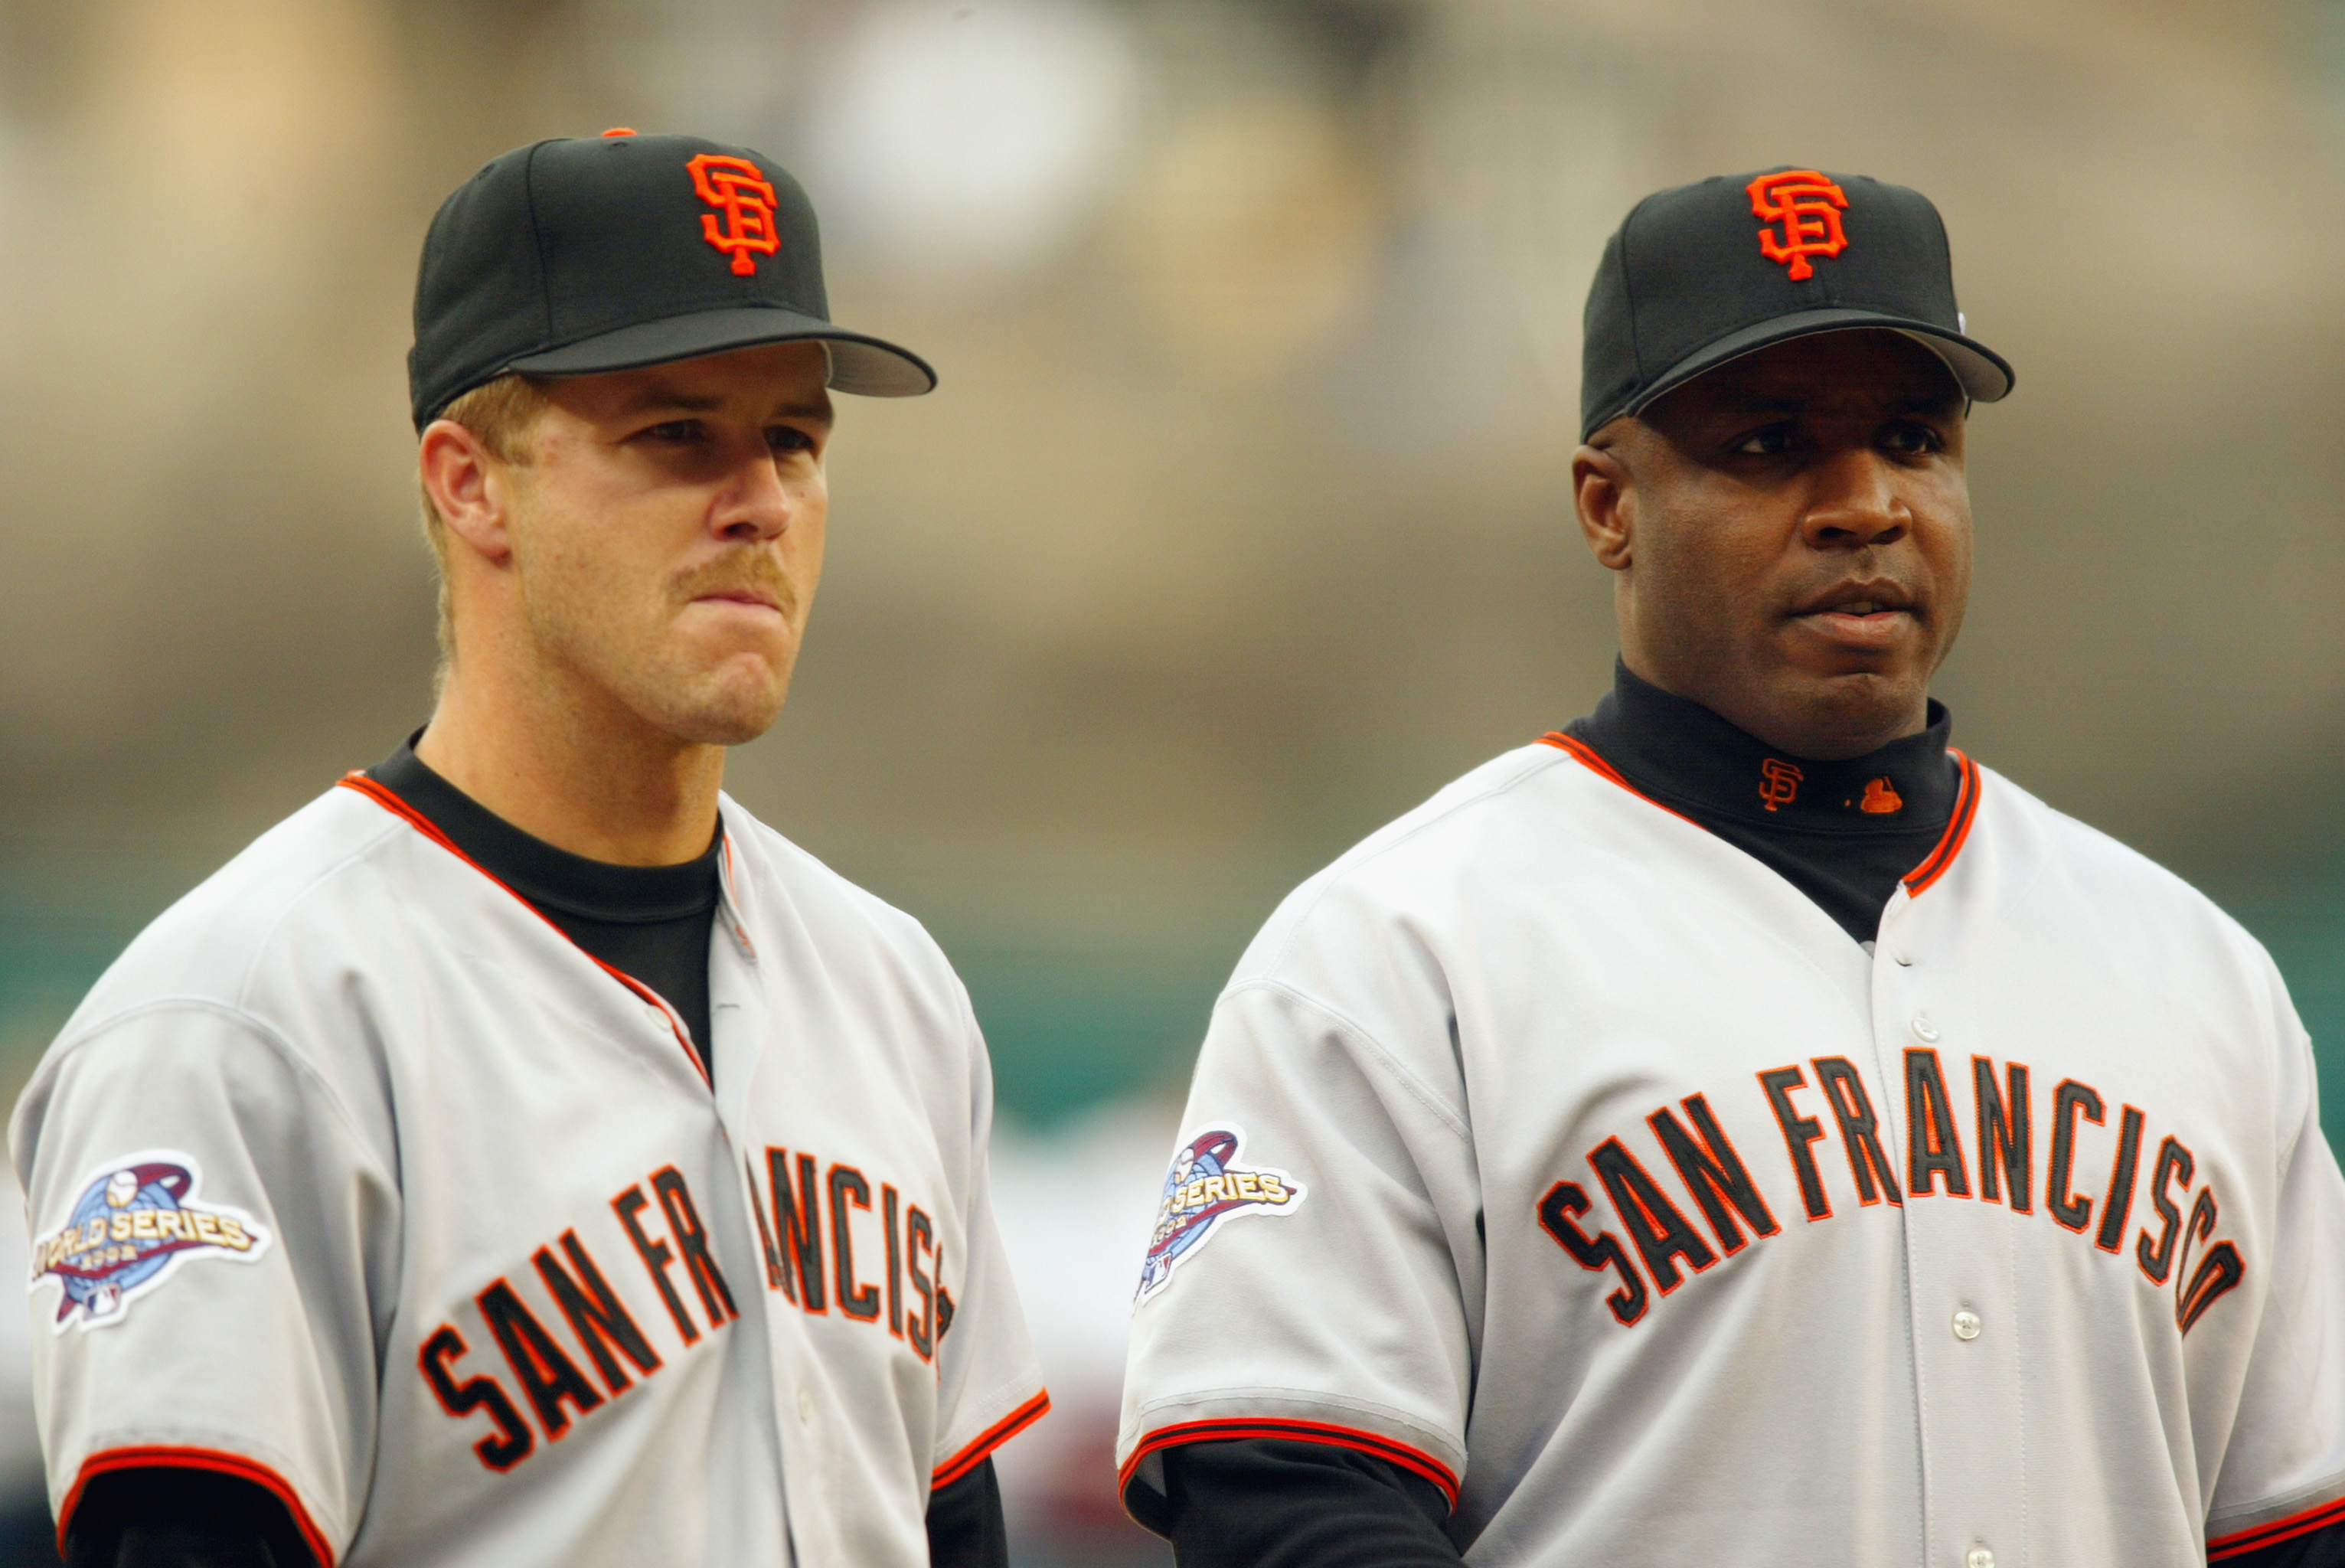 ANAHEIM, CA - OCTOBER 19:  Portrait of (L-R) Second Baseman Jeff Kent #21 and Left Fielder Barry Bonds #25 both of the San Francisco Giants during game one of the World Series against the Anaheim Angels on October 19, 2002 at Edison Field in Anaheim, Cali